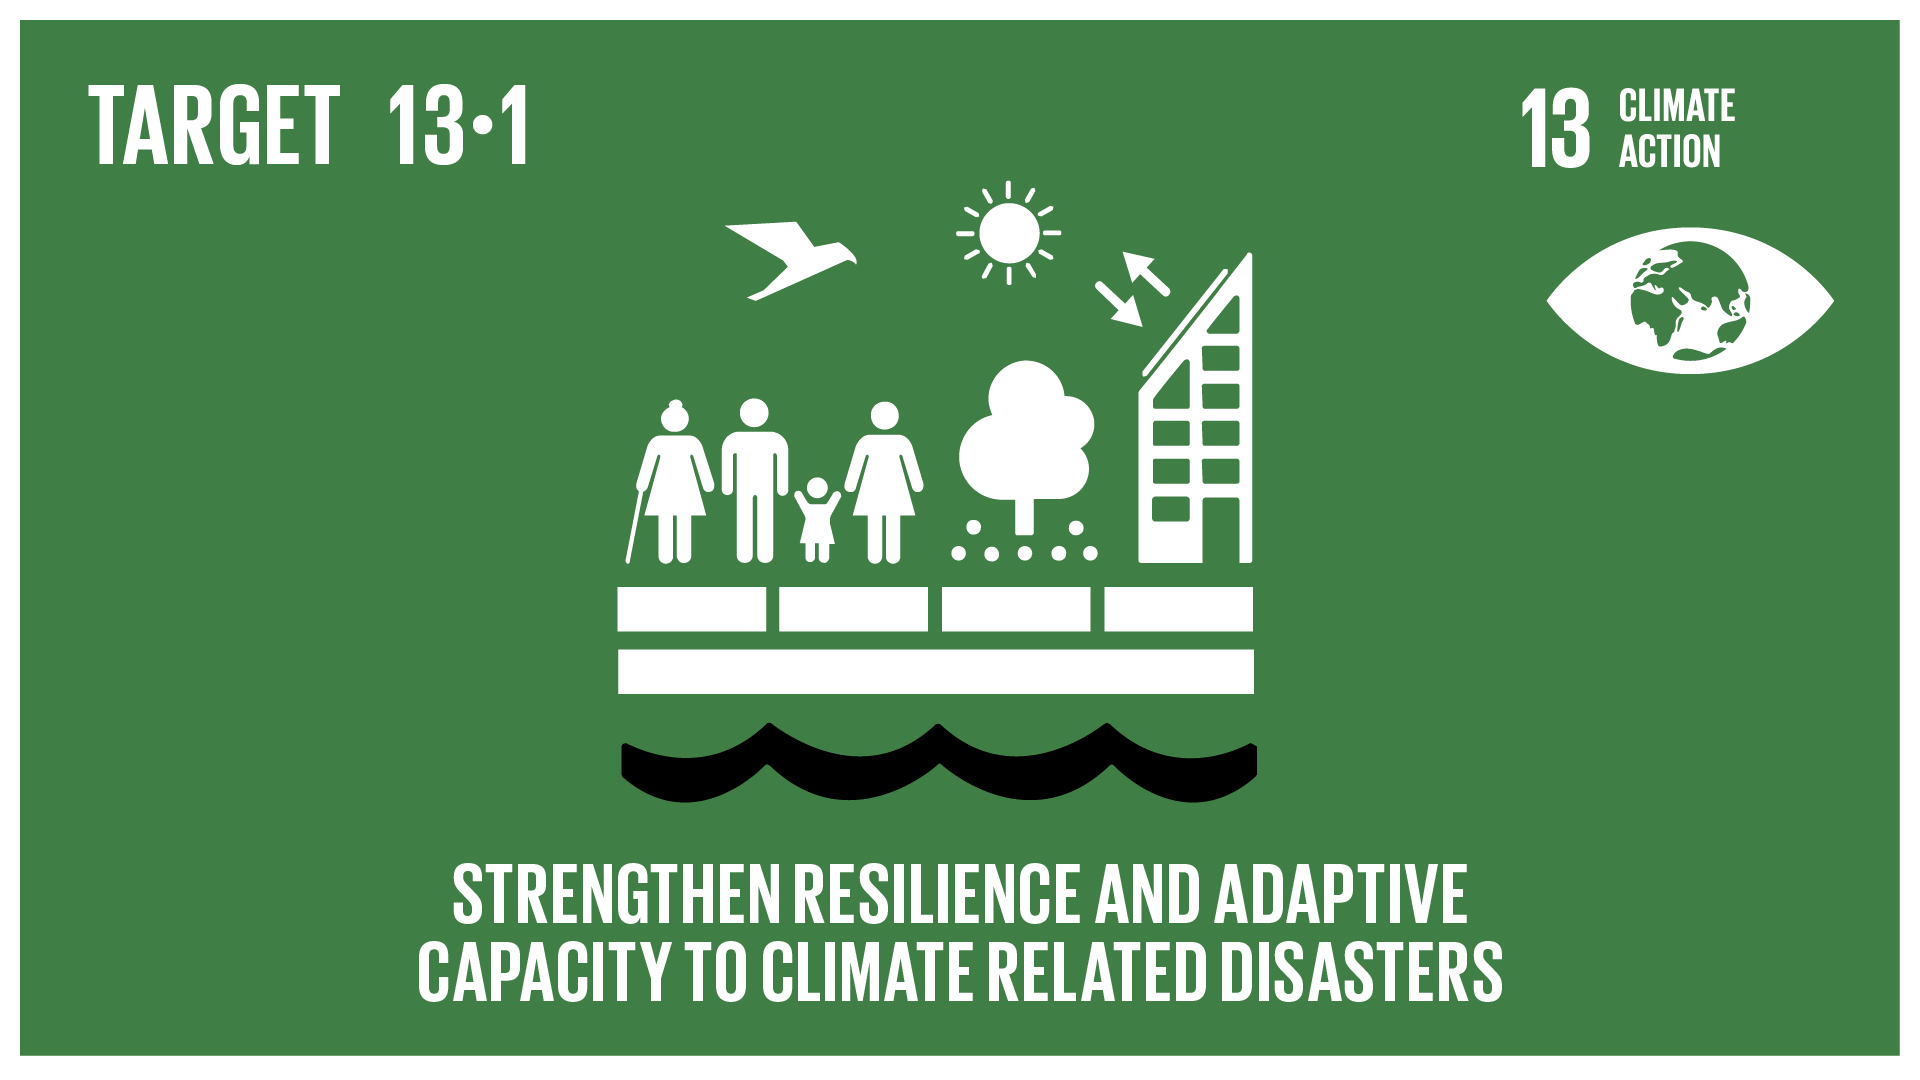 Graphic displaying the strengthening of resilience and adaptive capacity to climate-related hazards and natural disasters